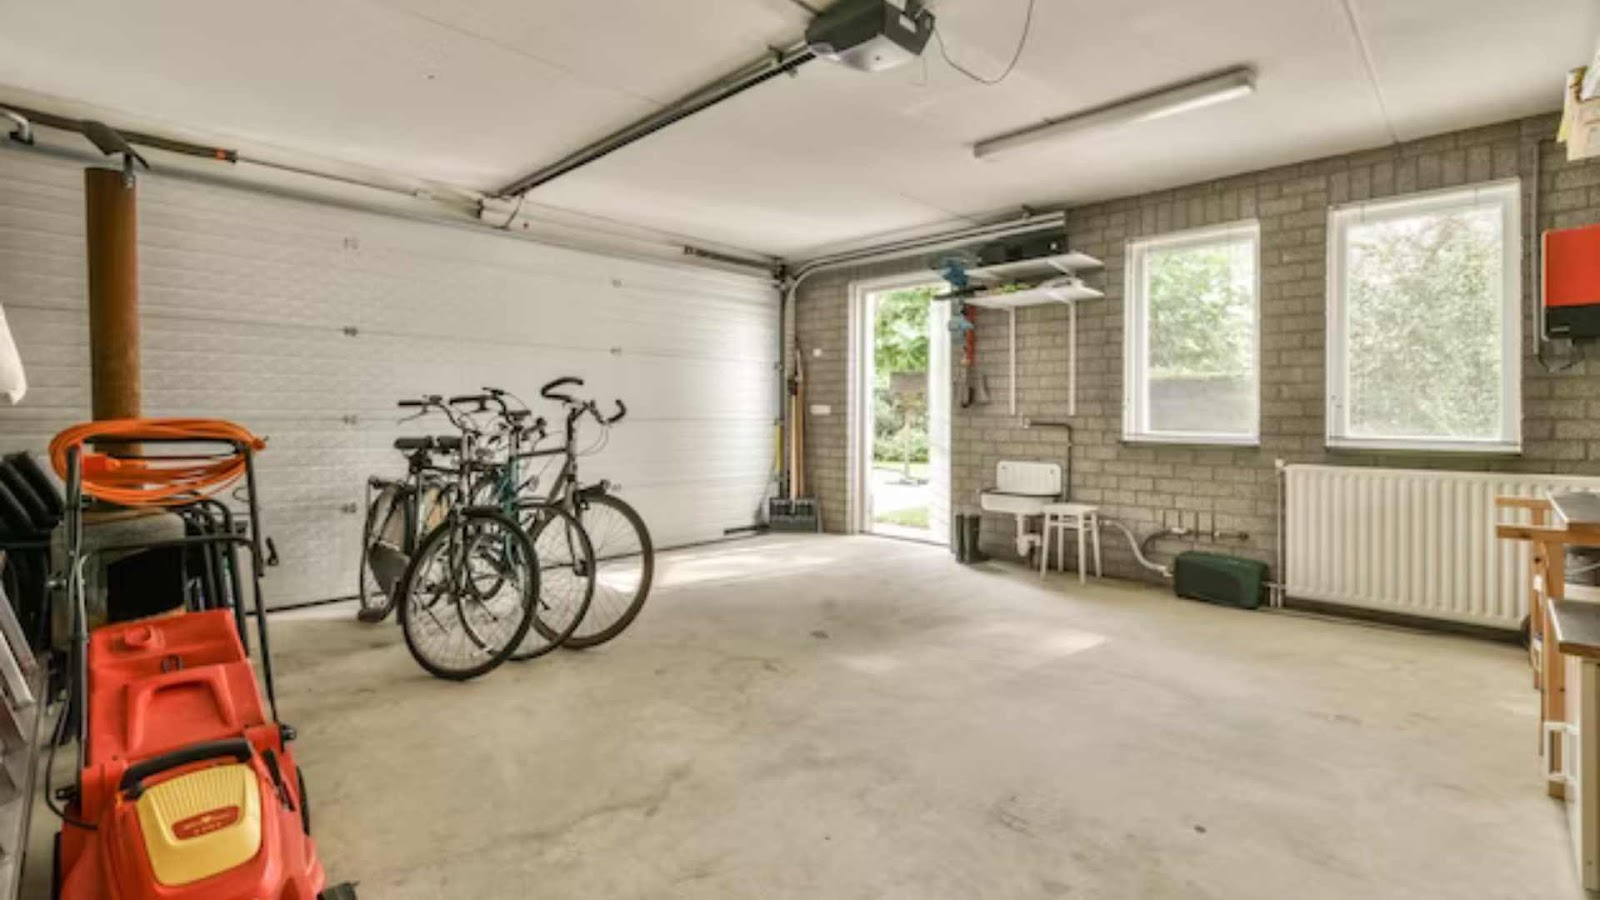 Choosing the right color for your gray garage wall with garage floor: